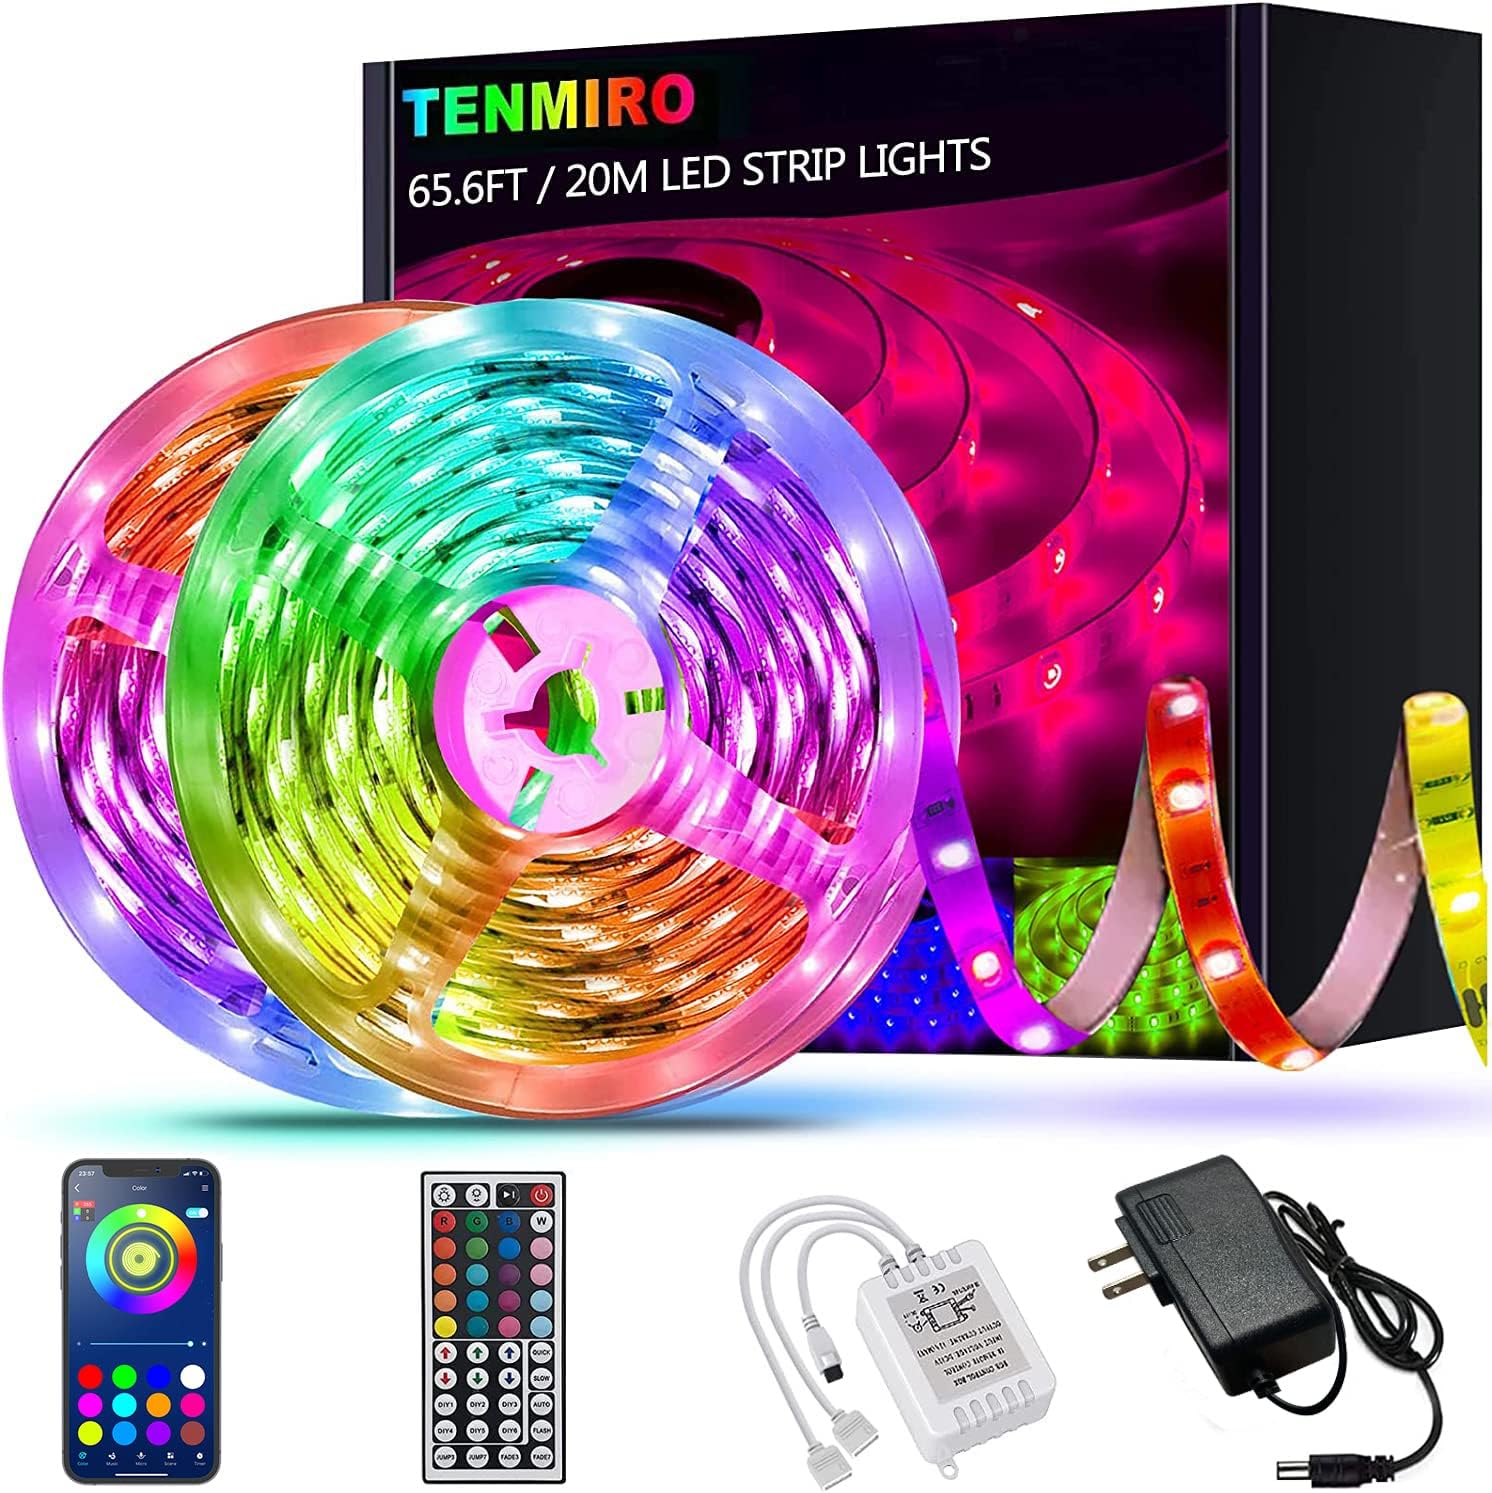 They were easy to install and get set up and the colors are bright and Vibrant.I bought the 65 ft nd I was able to wrap my whole room. The remote was the only flaw it doesnt really work.